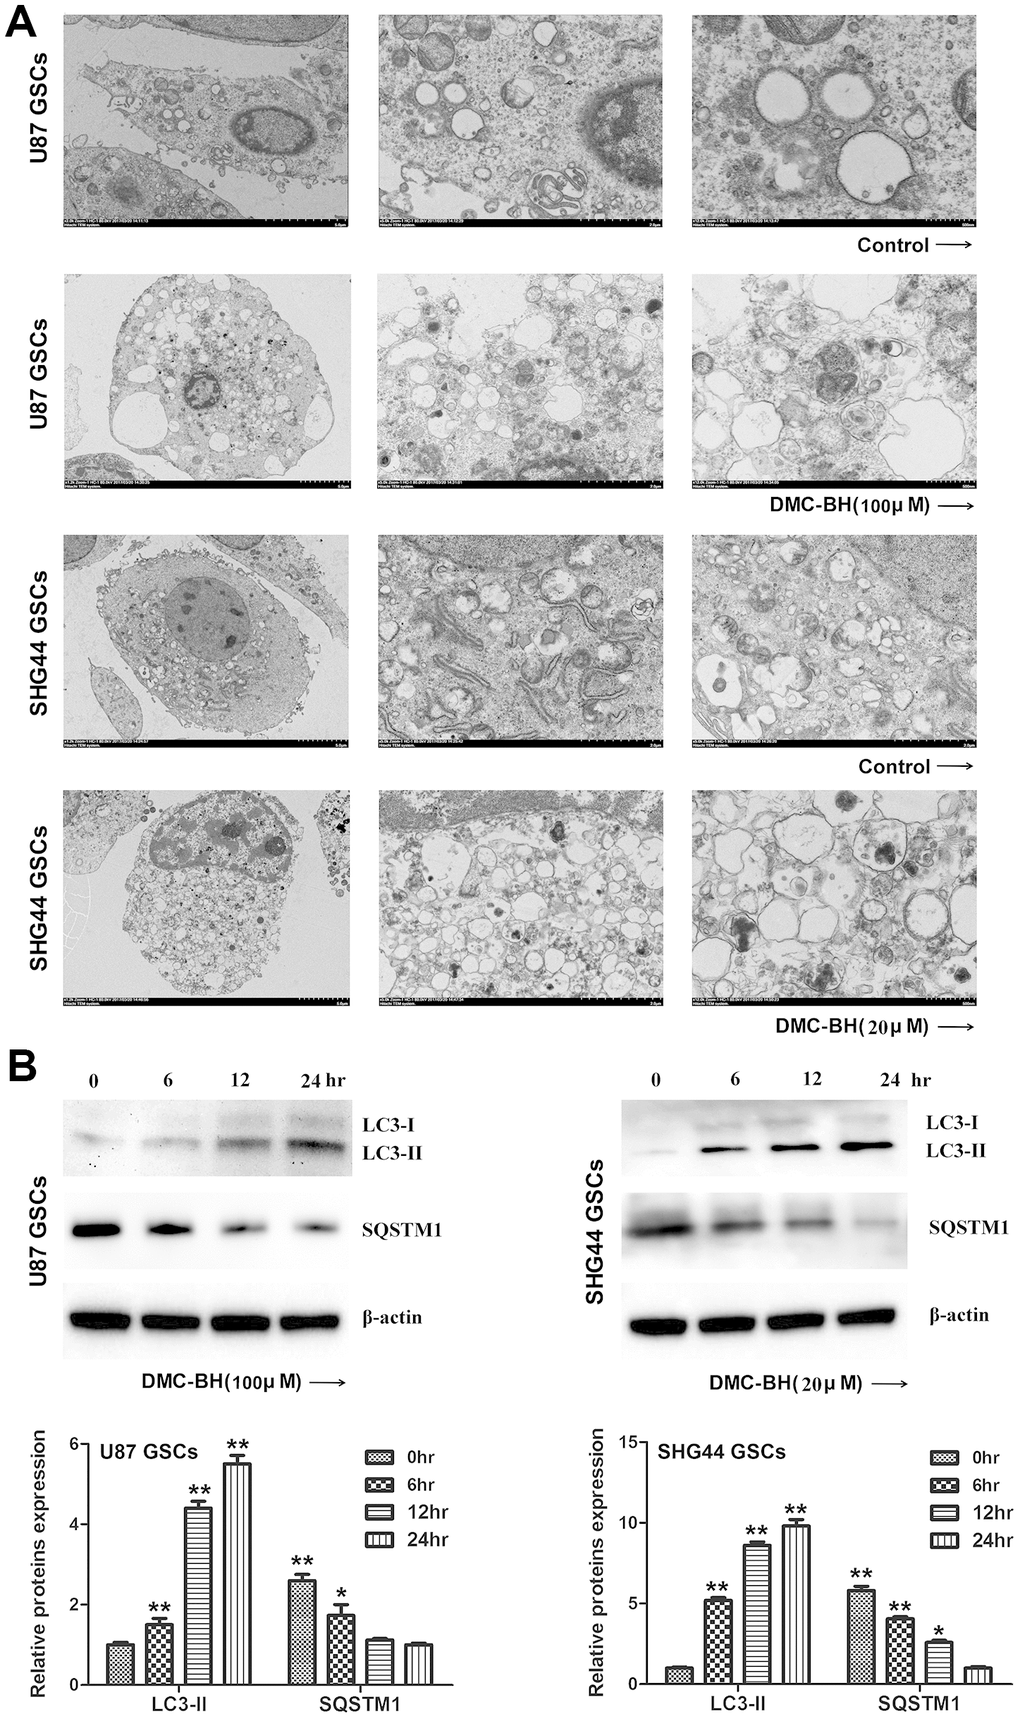 DMC-BH induces autophagy in GSCs. (A) Representative images of autophagosome formation in DMC-BH-treated U87 and SHG44 GSCs detected by TEM. (B) Levels of autophagy related proteins SQSTM1 and LC3 II measured in DMC-BH treated GSCs by western blotting.